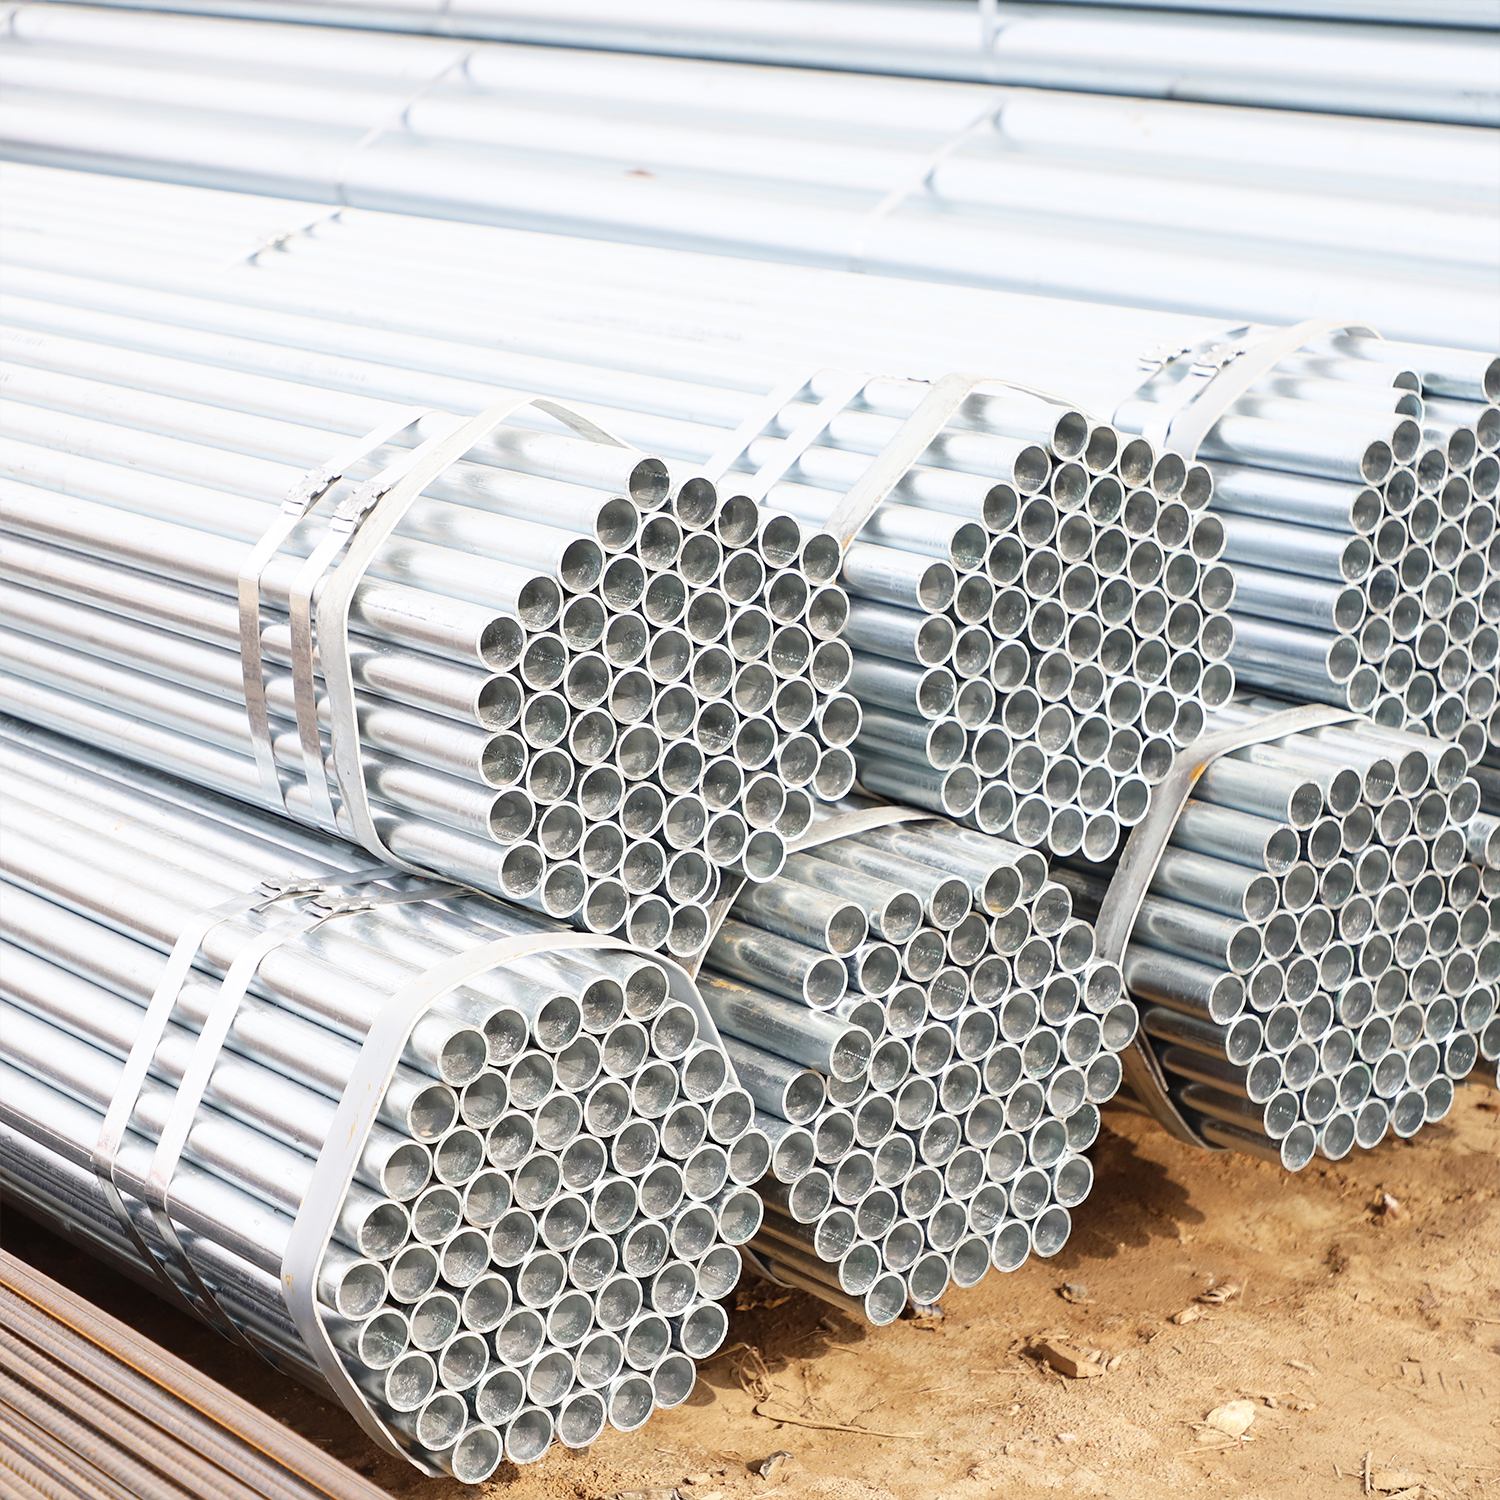 Do galvanized pipes need to do anti-corrosion treatment when installing underground?